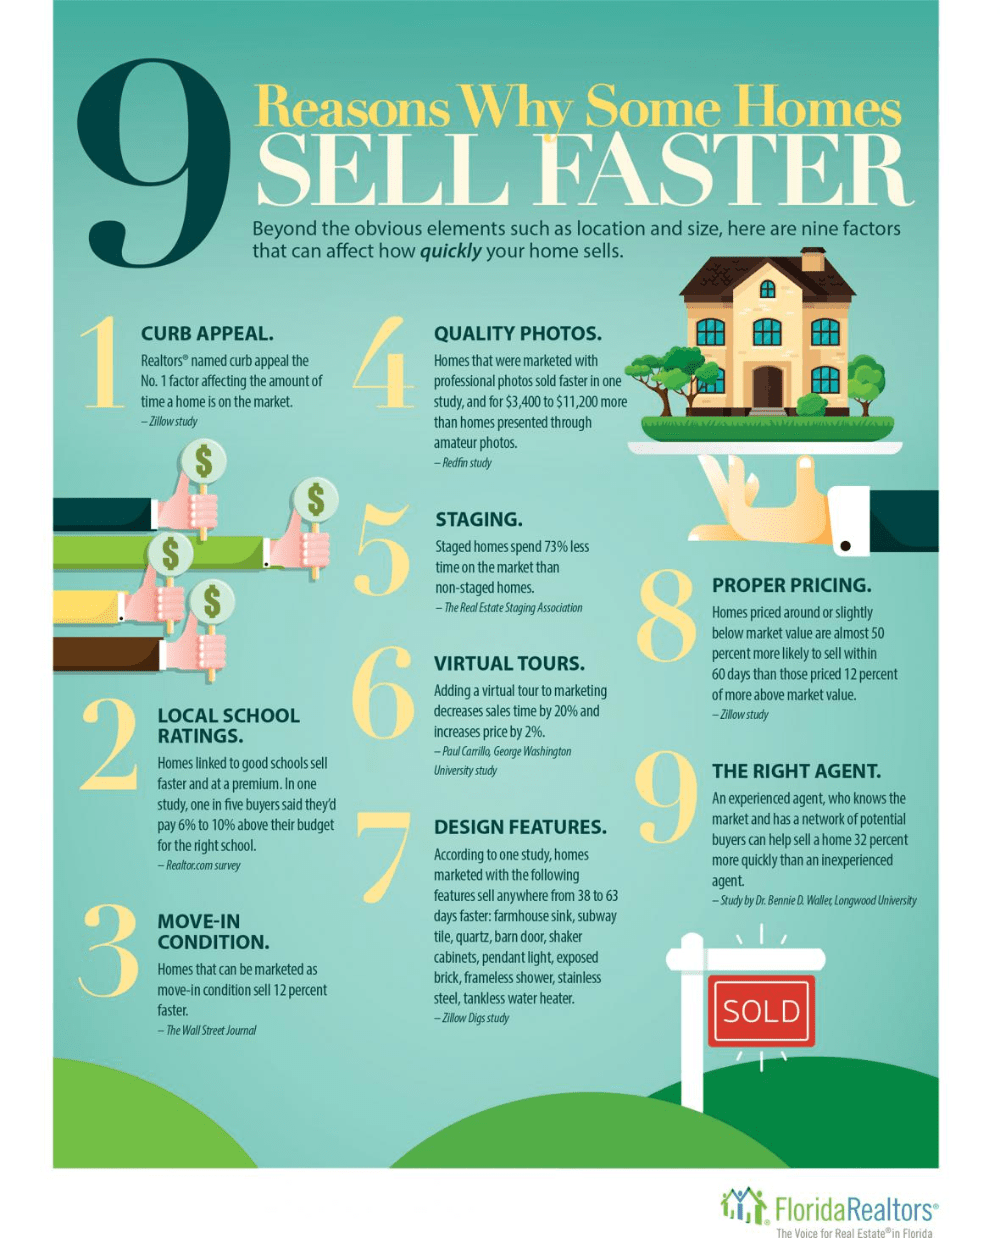 Learn how to sell real estate